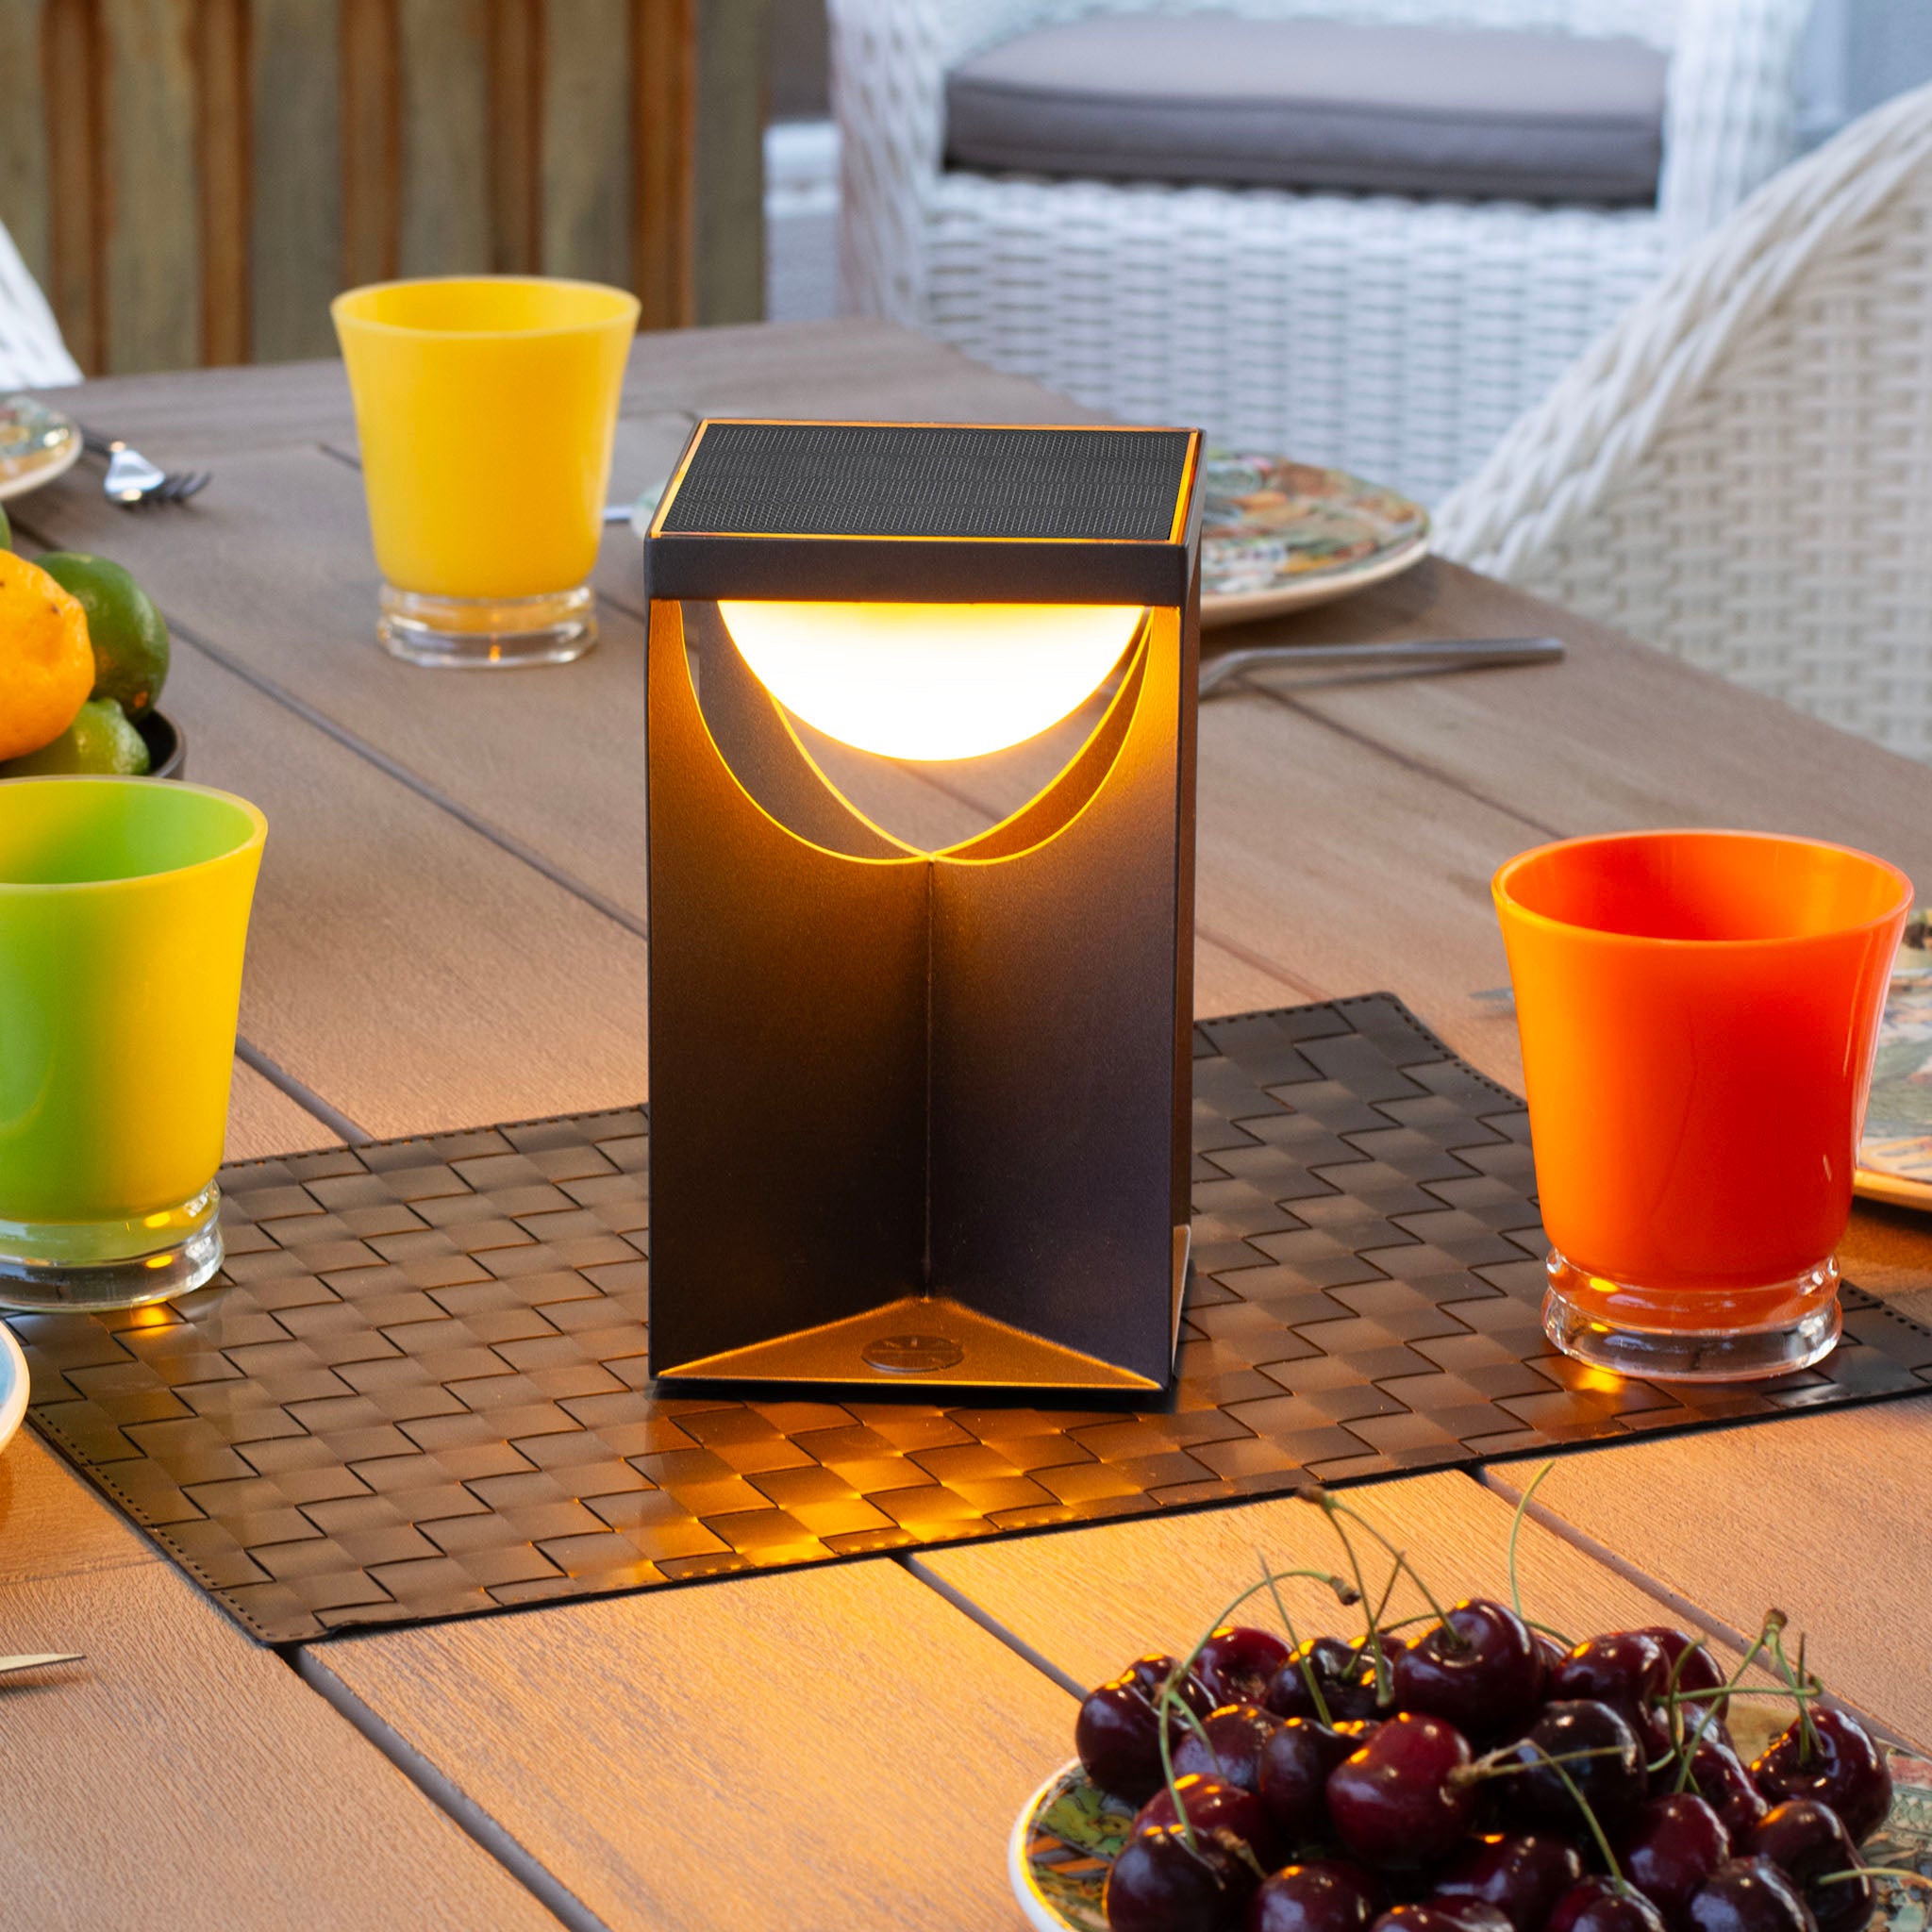 Flow table lamp in amber light mode on outdoor dining table